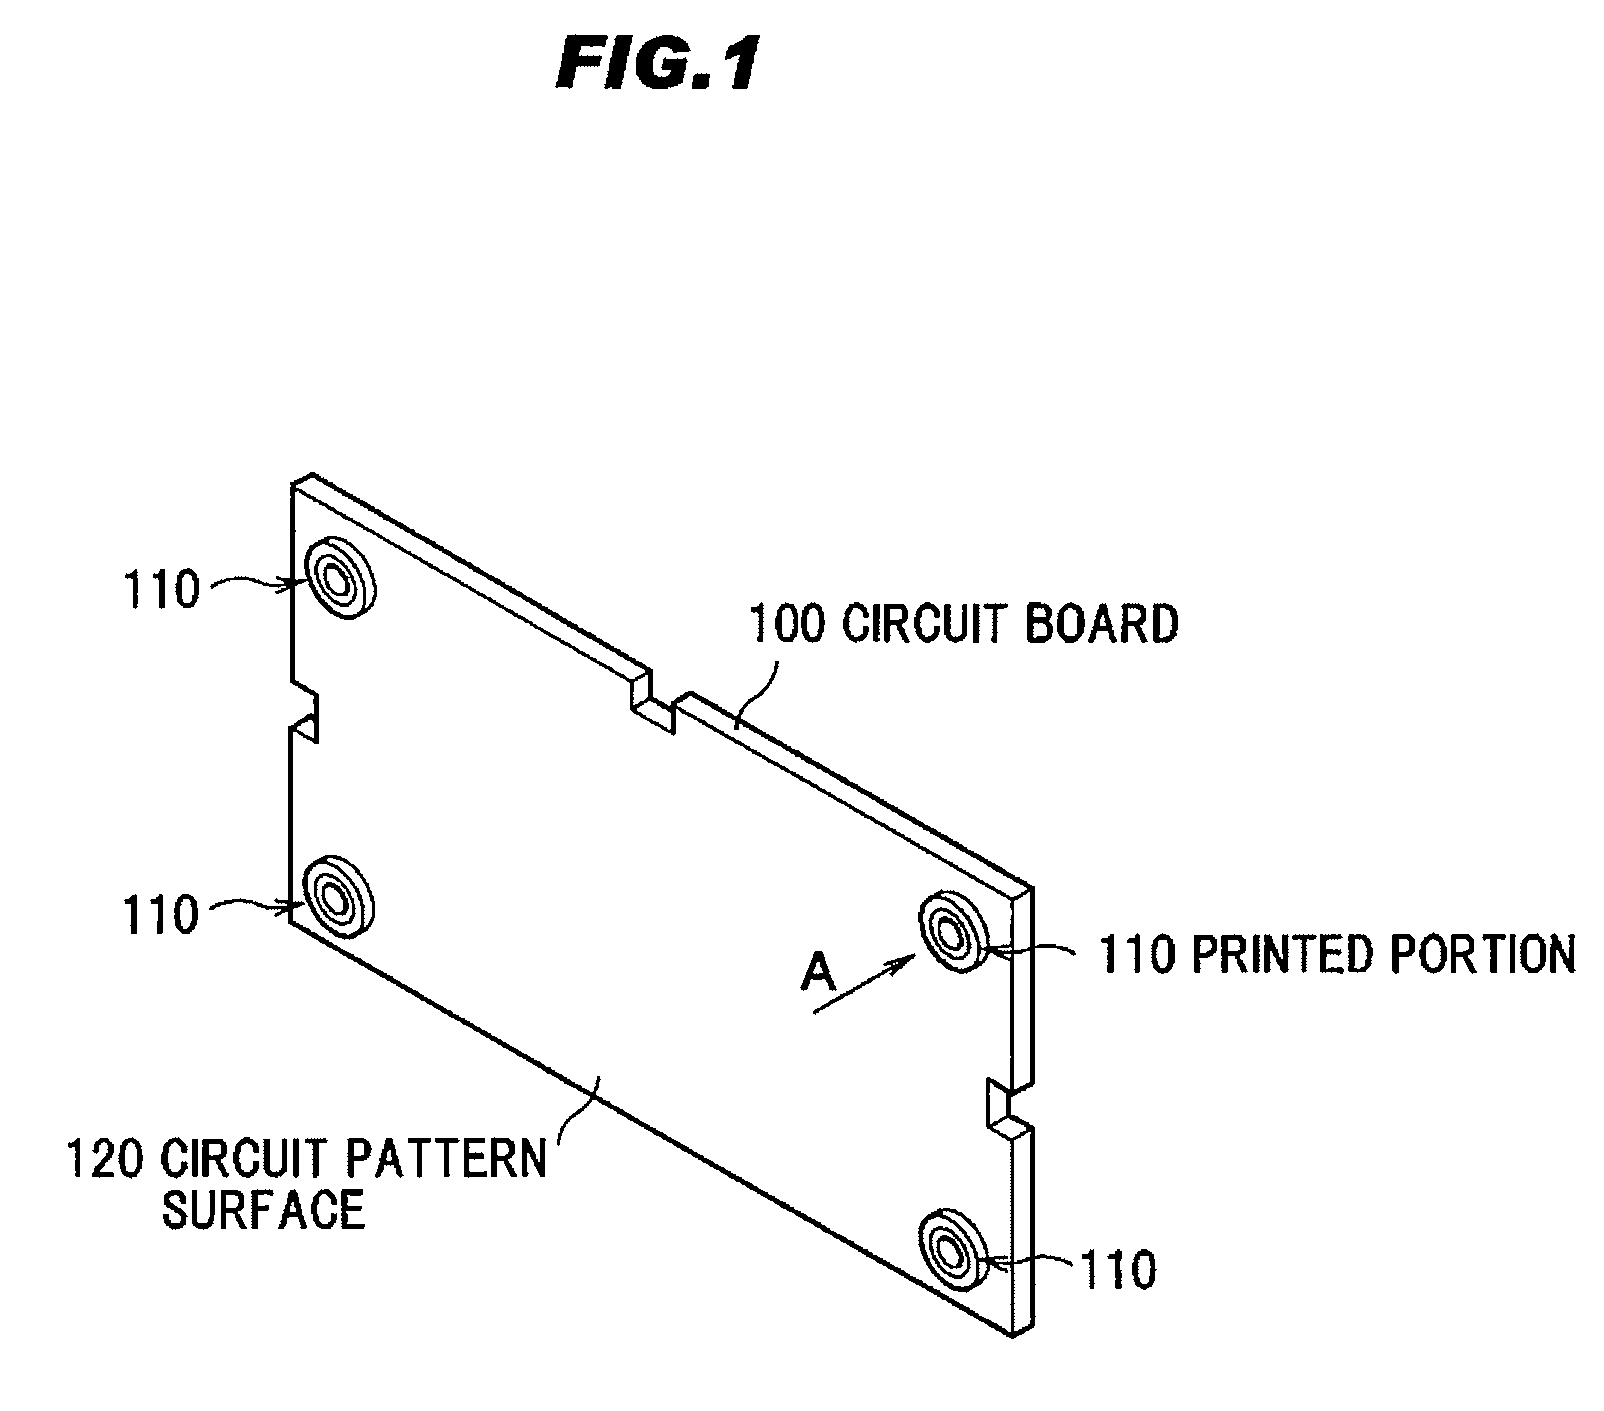 Circuit board and electronic device with the same